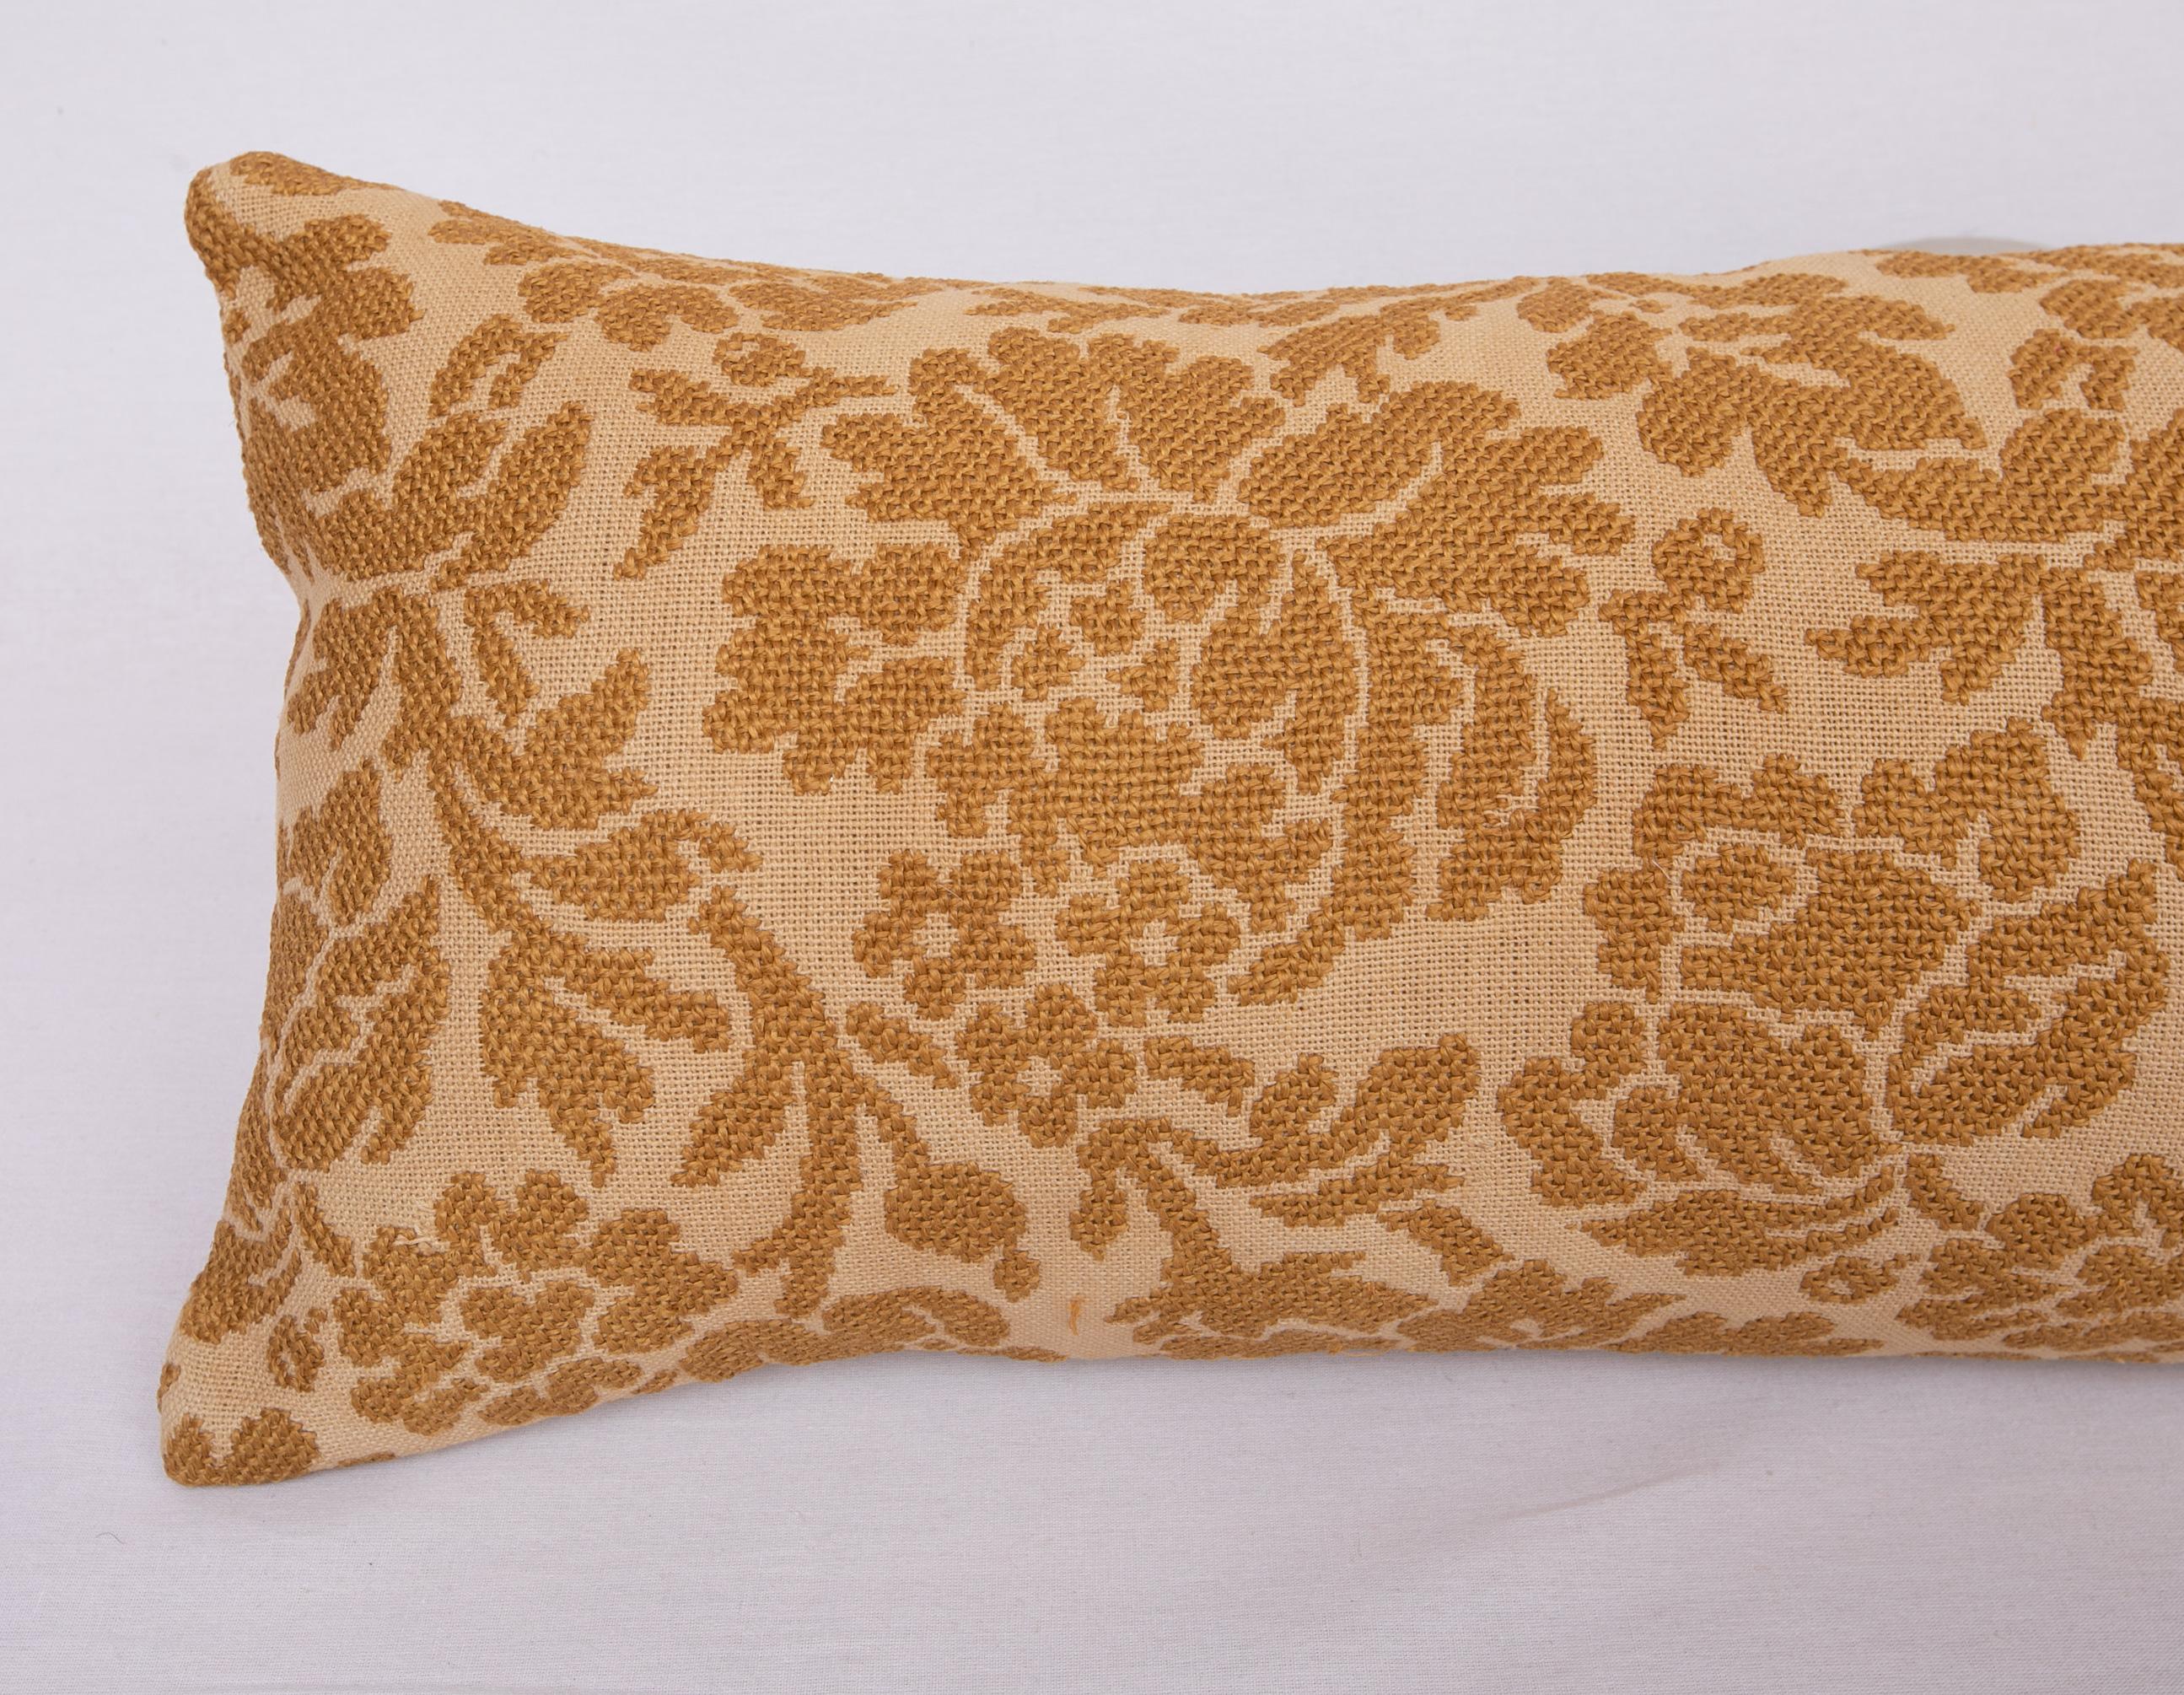 Suzani Antique Pillowcase Made from an Early 20th C. European Embroidery For Sale